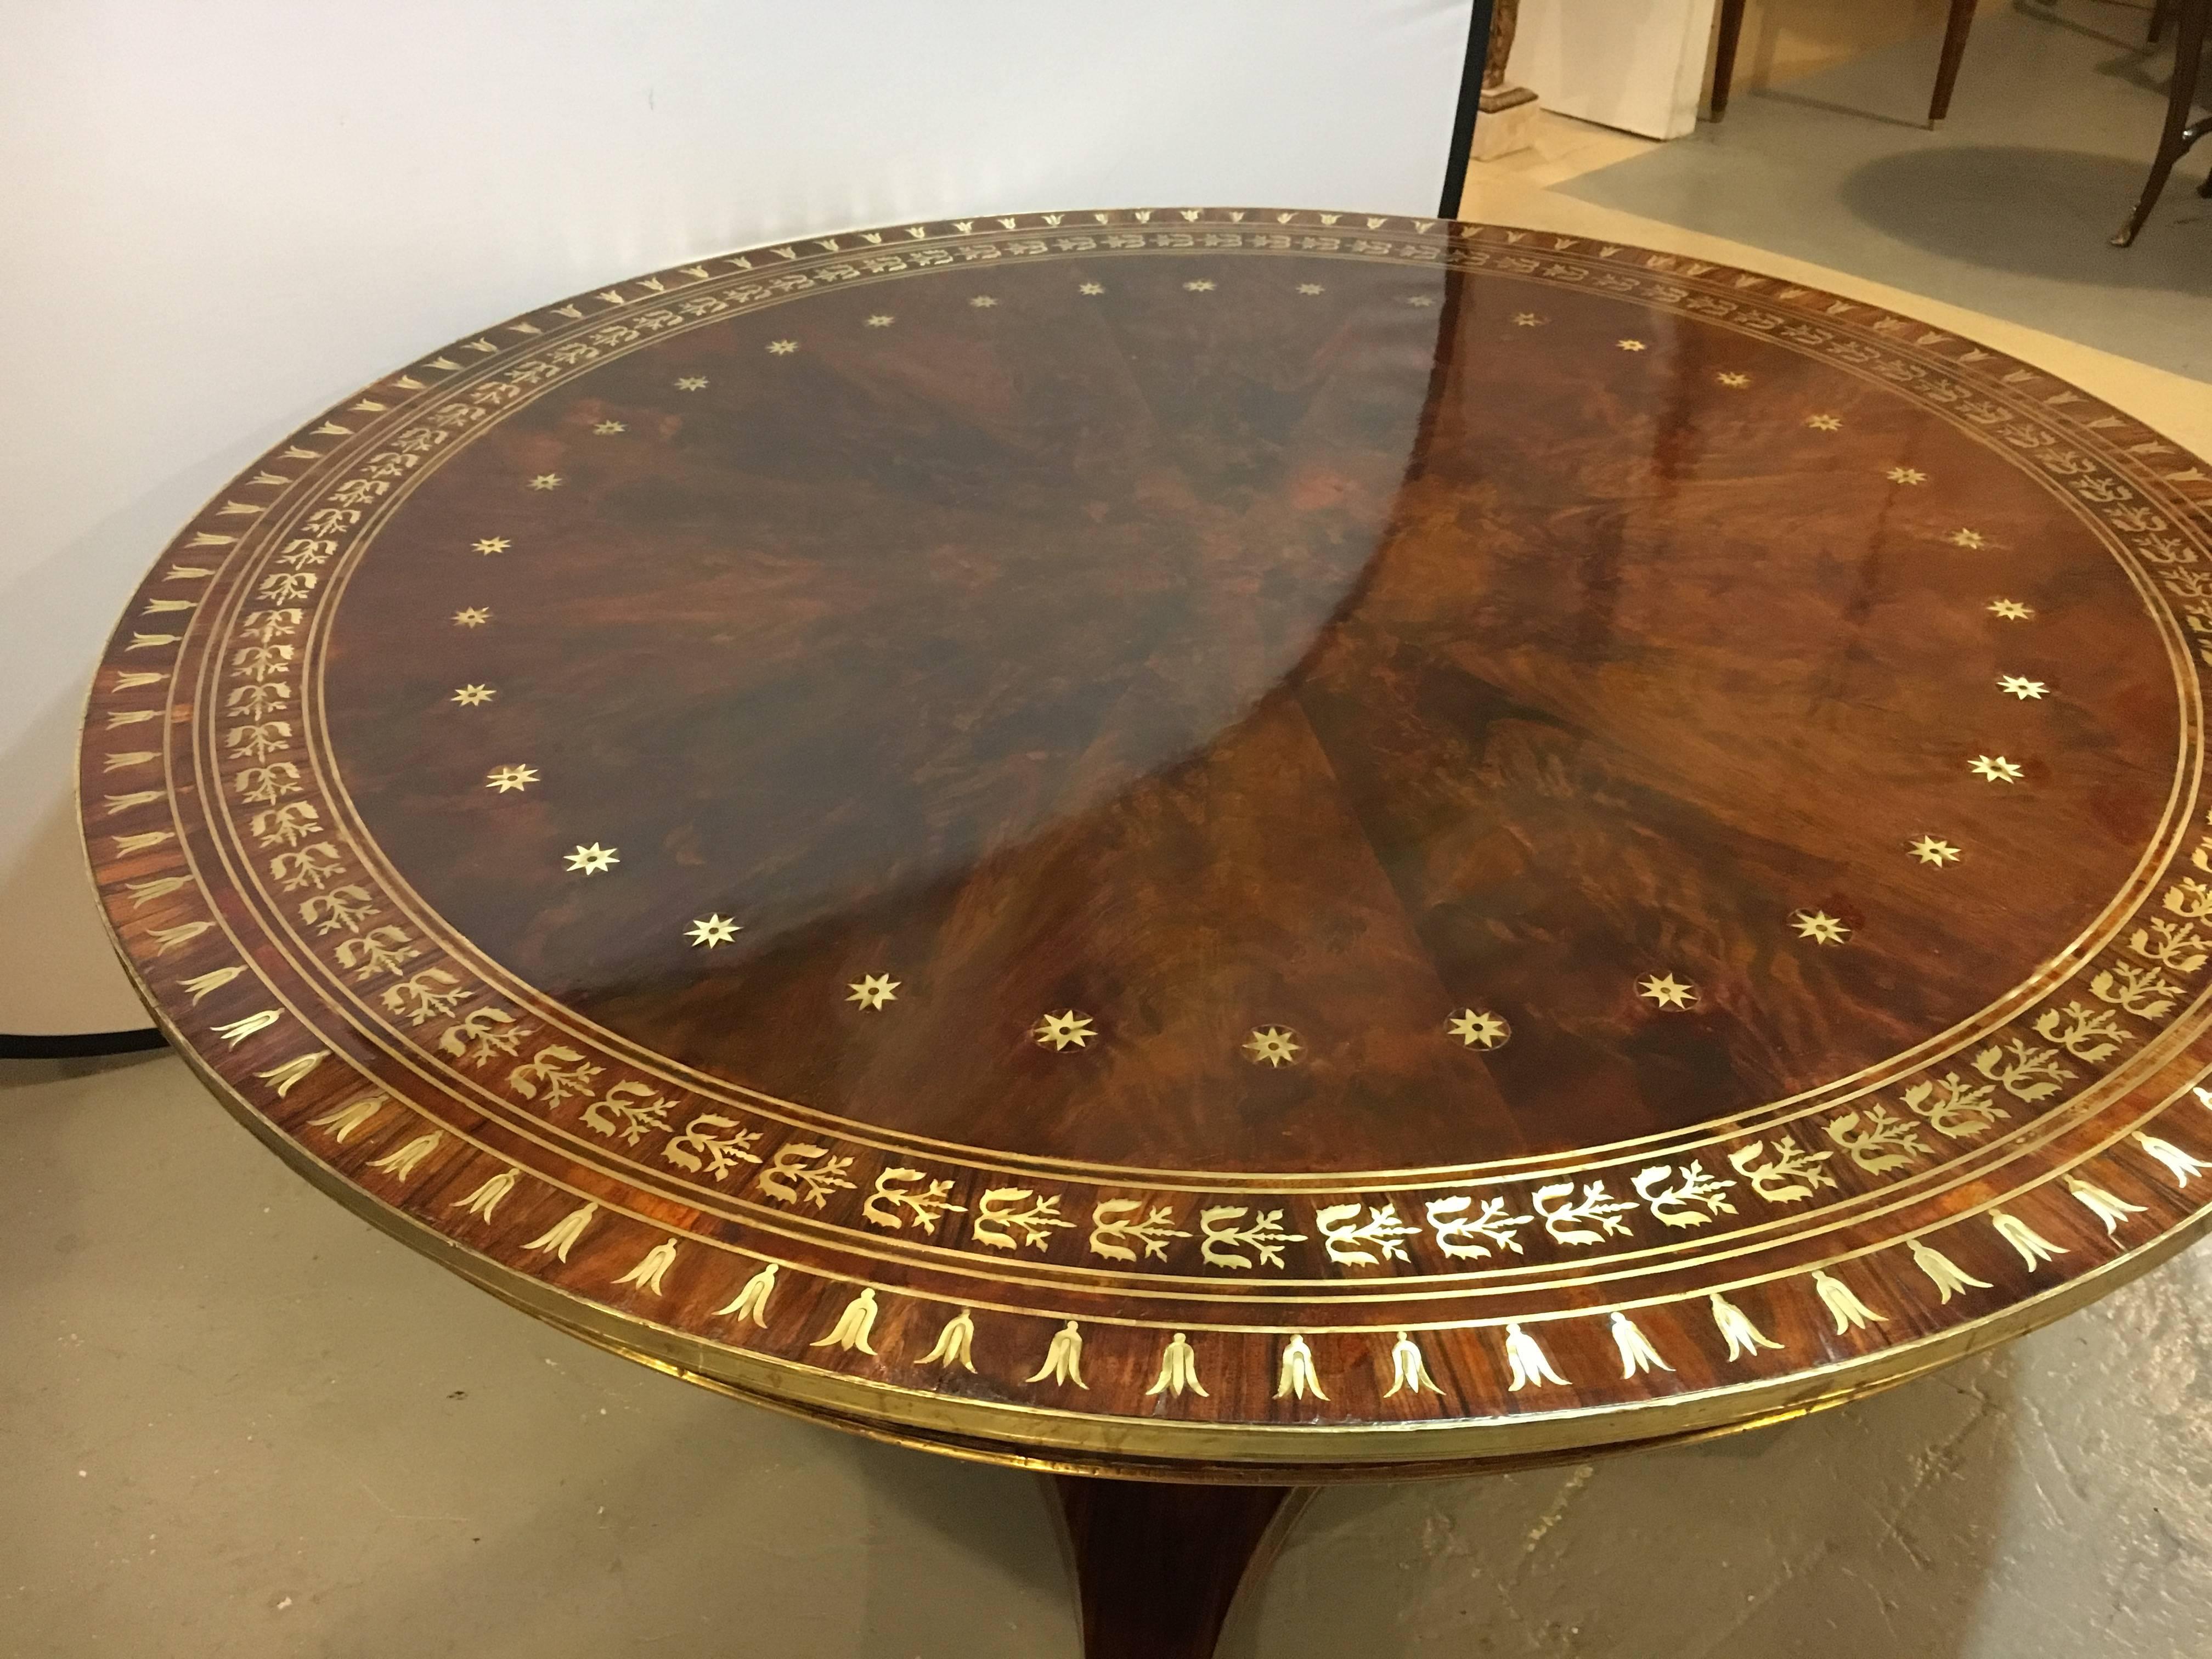 Russian neoclassical boule inlaid centre tilting table. Simply the best one has to offer. This fine late 19th-early 20th century Russian Inspired centre table appears to be solid rosewood with brass (boule) inlays of flame design. The palatial gilt